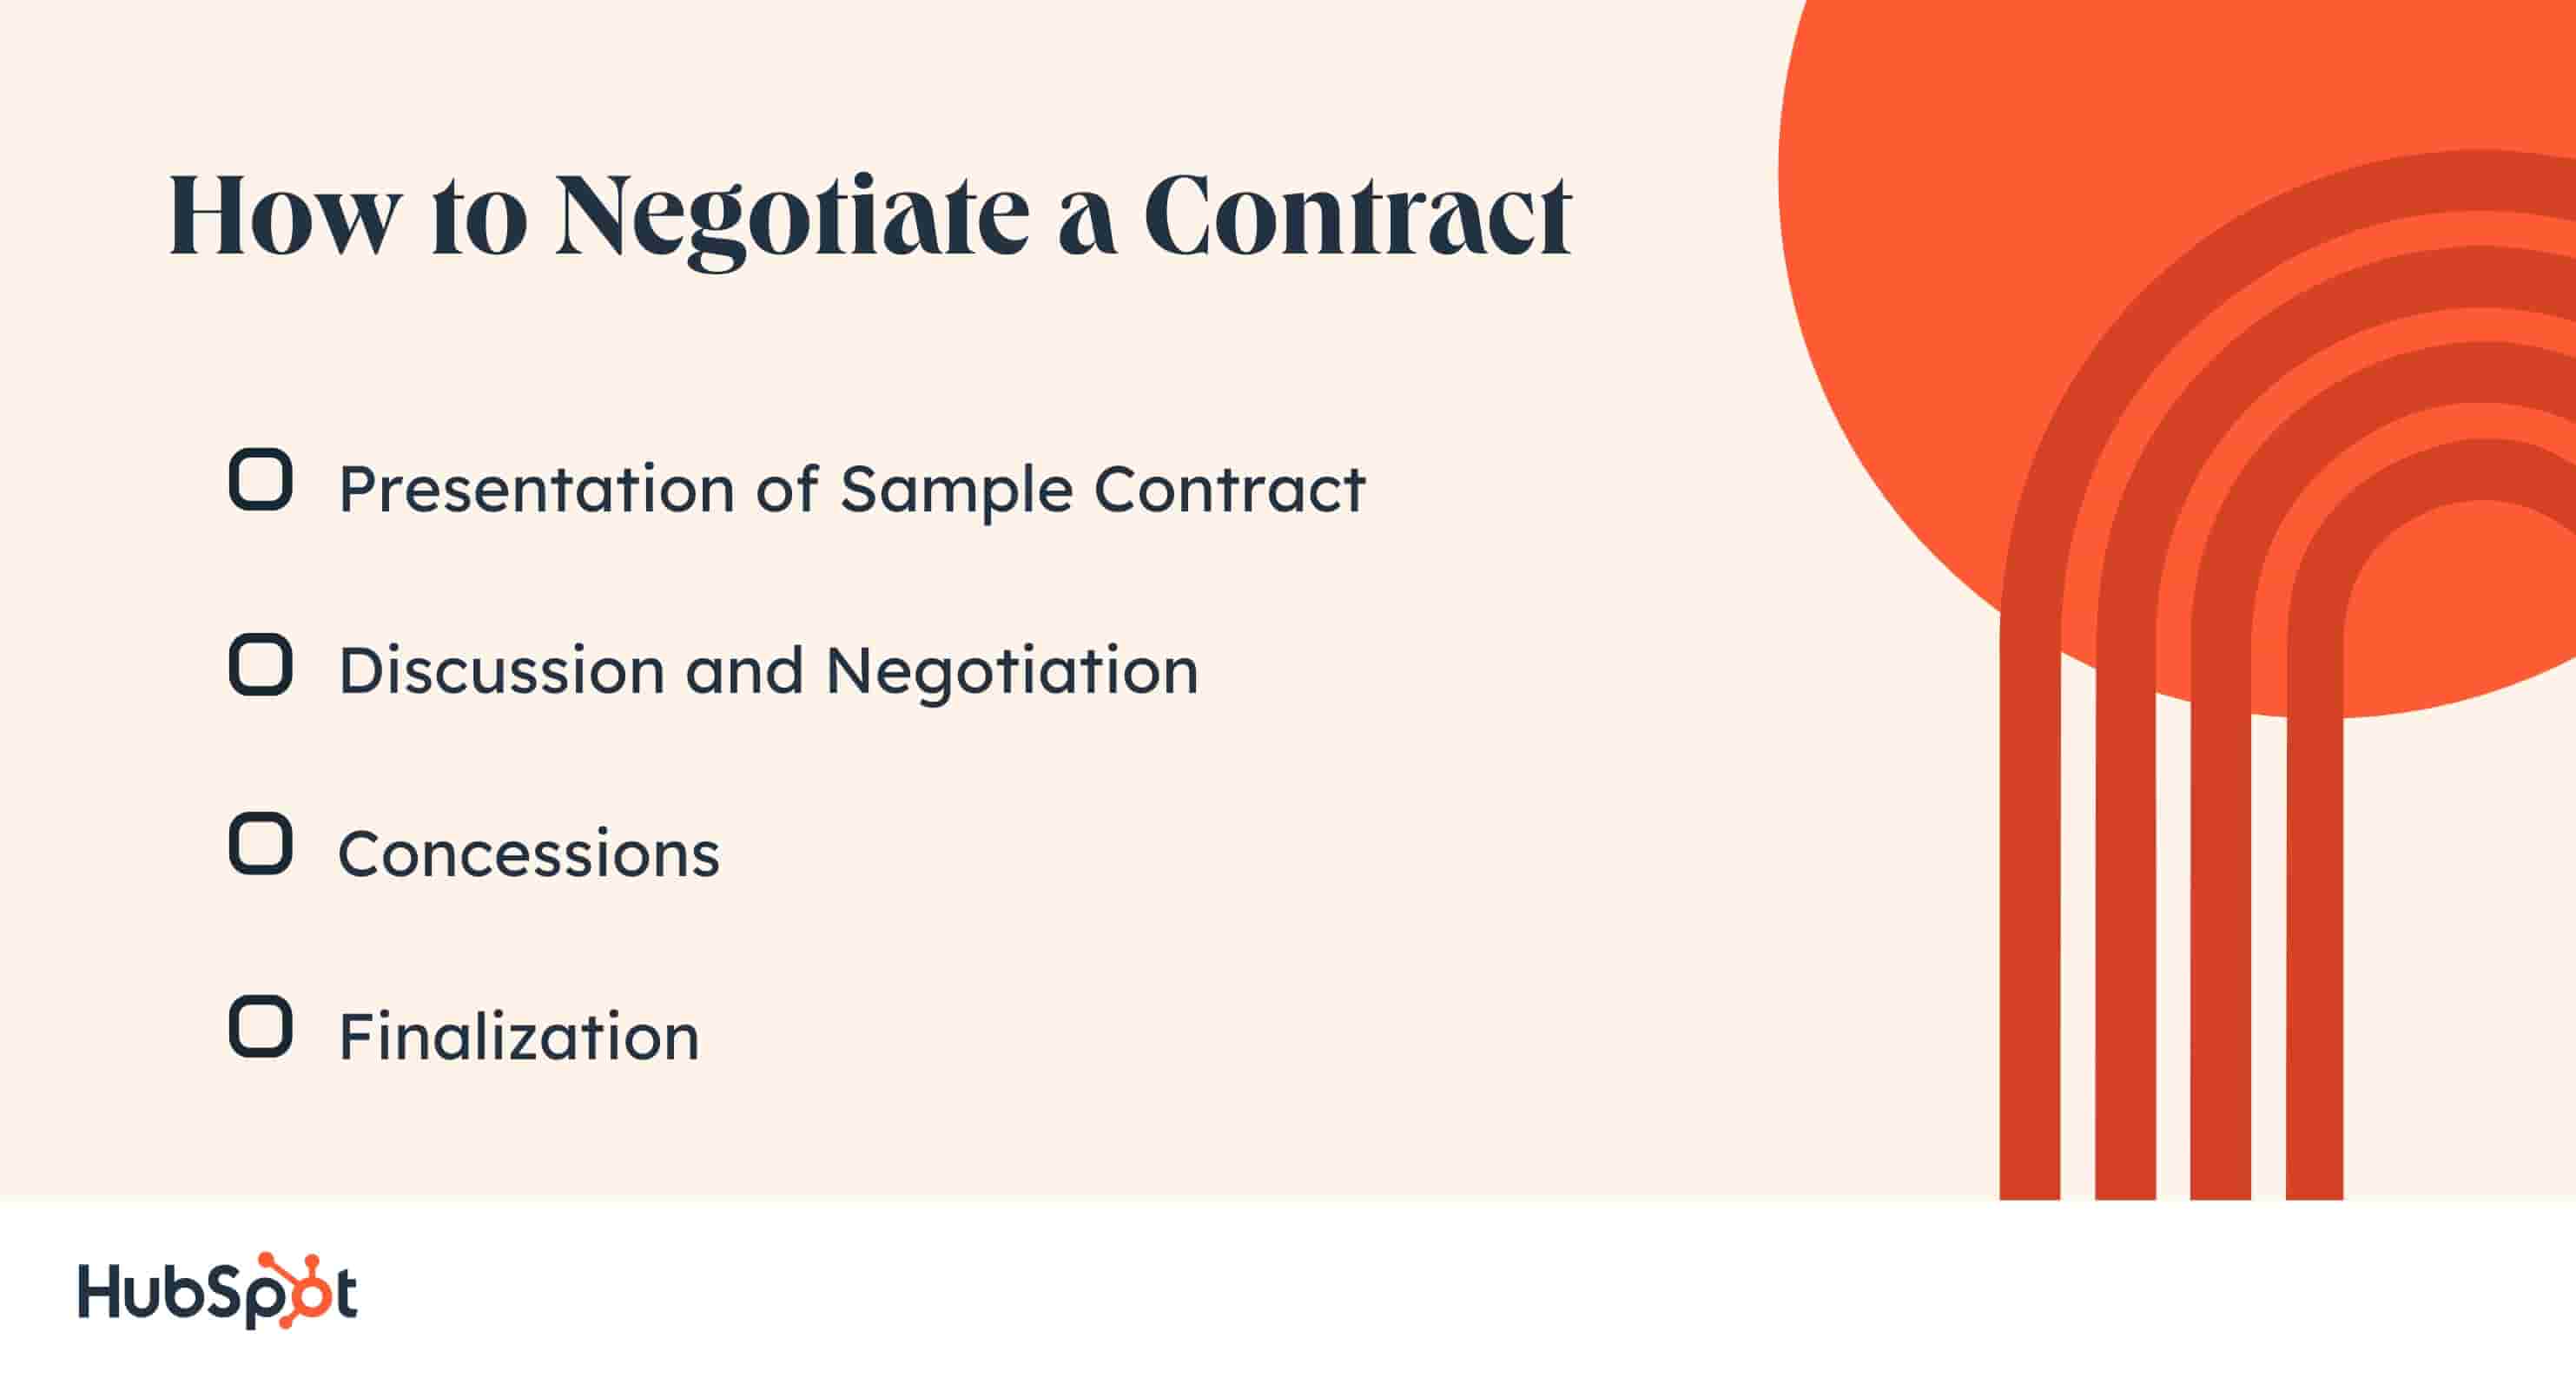 contract negotiation process, How to Negotiate a Contract. Presentation of Sample Contract. Discussion and Negotiation. Concession. Finalization.